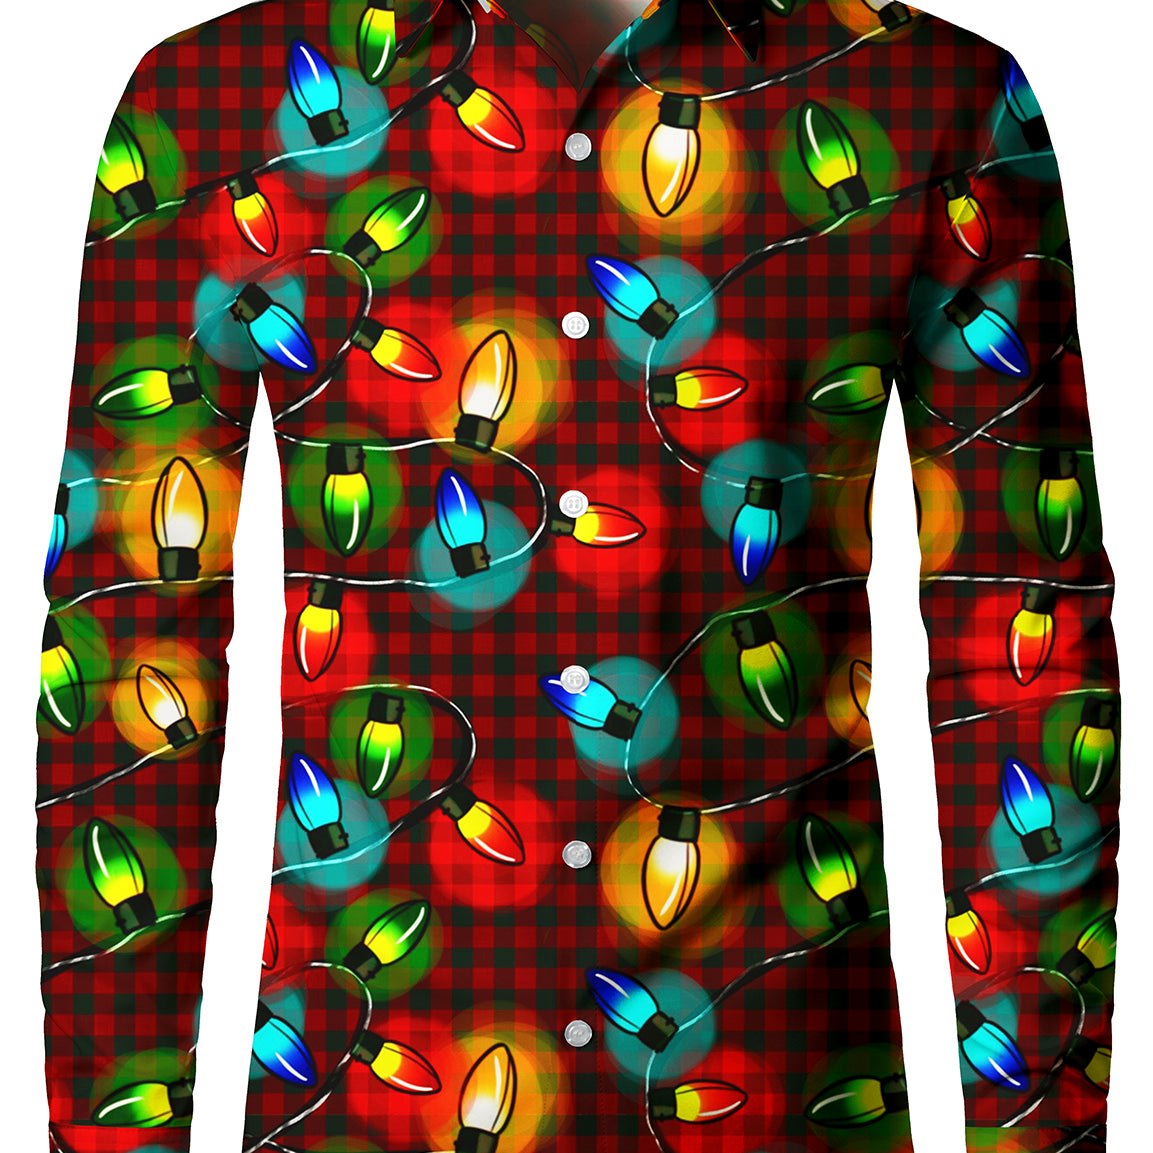 Men's Christmas Neon Plaid Long Sleeve Holiday Party Button Up Shirt